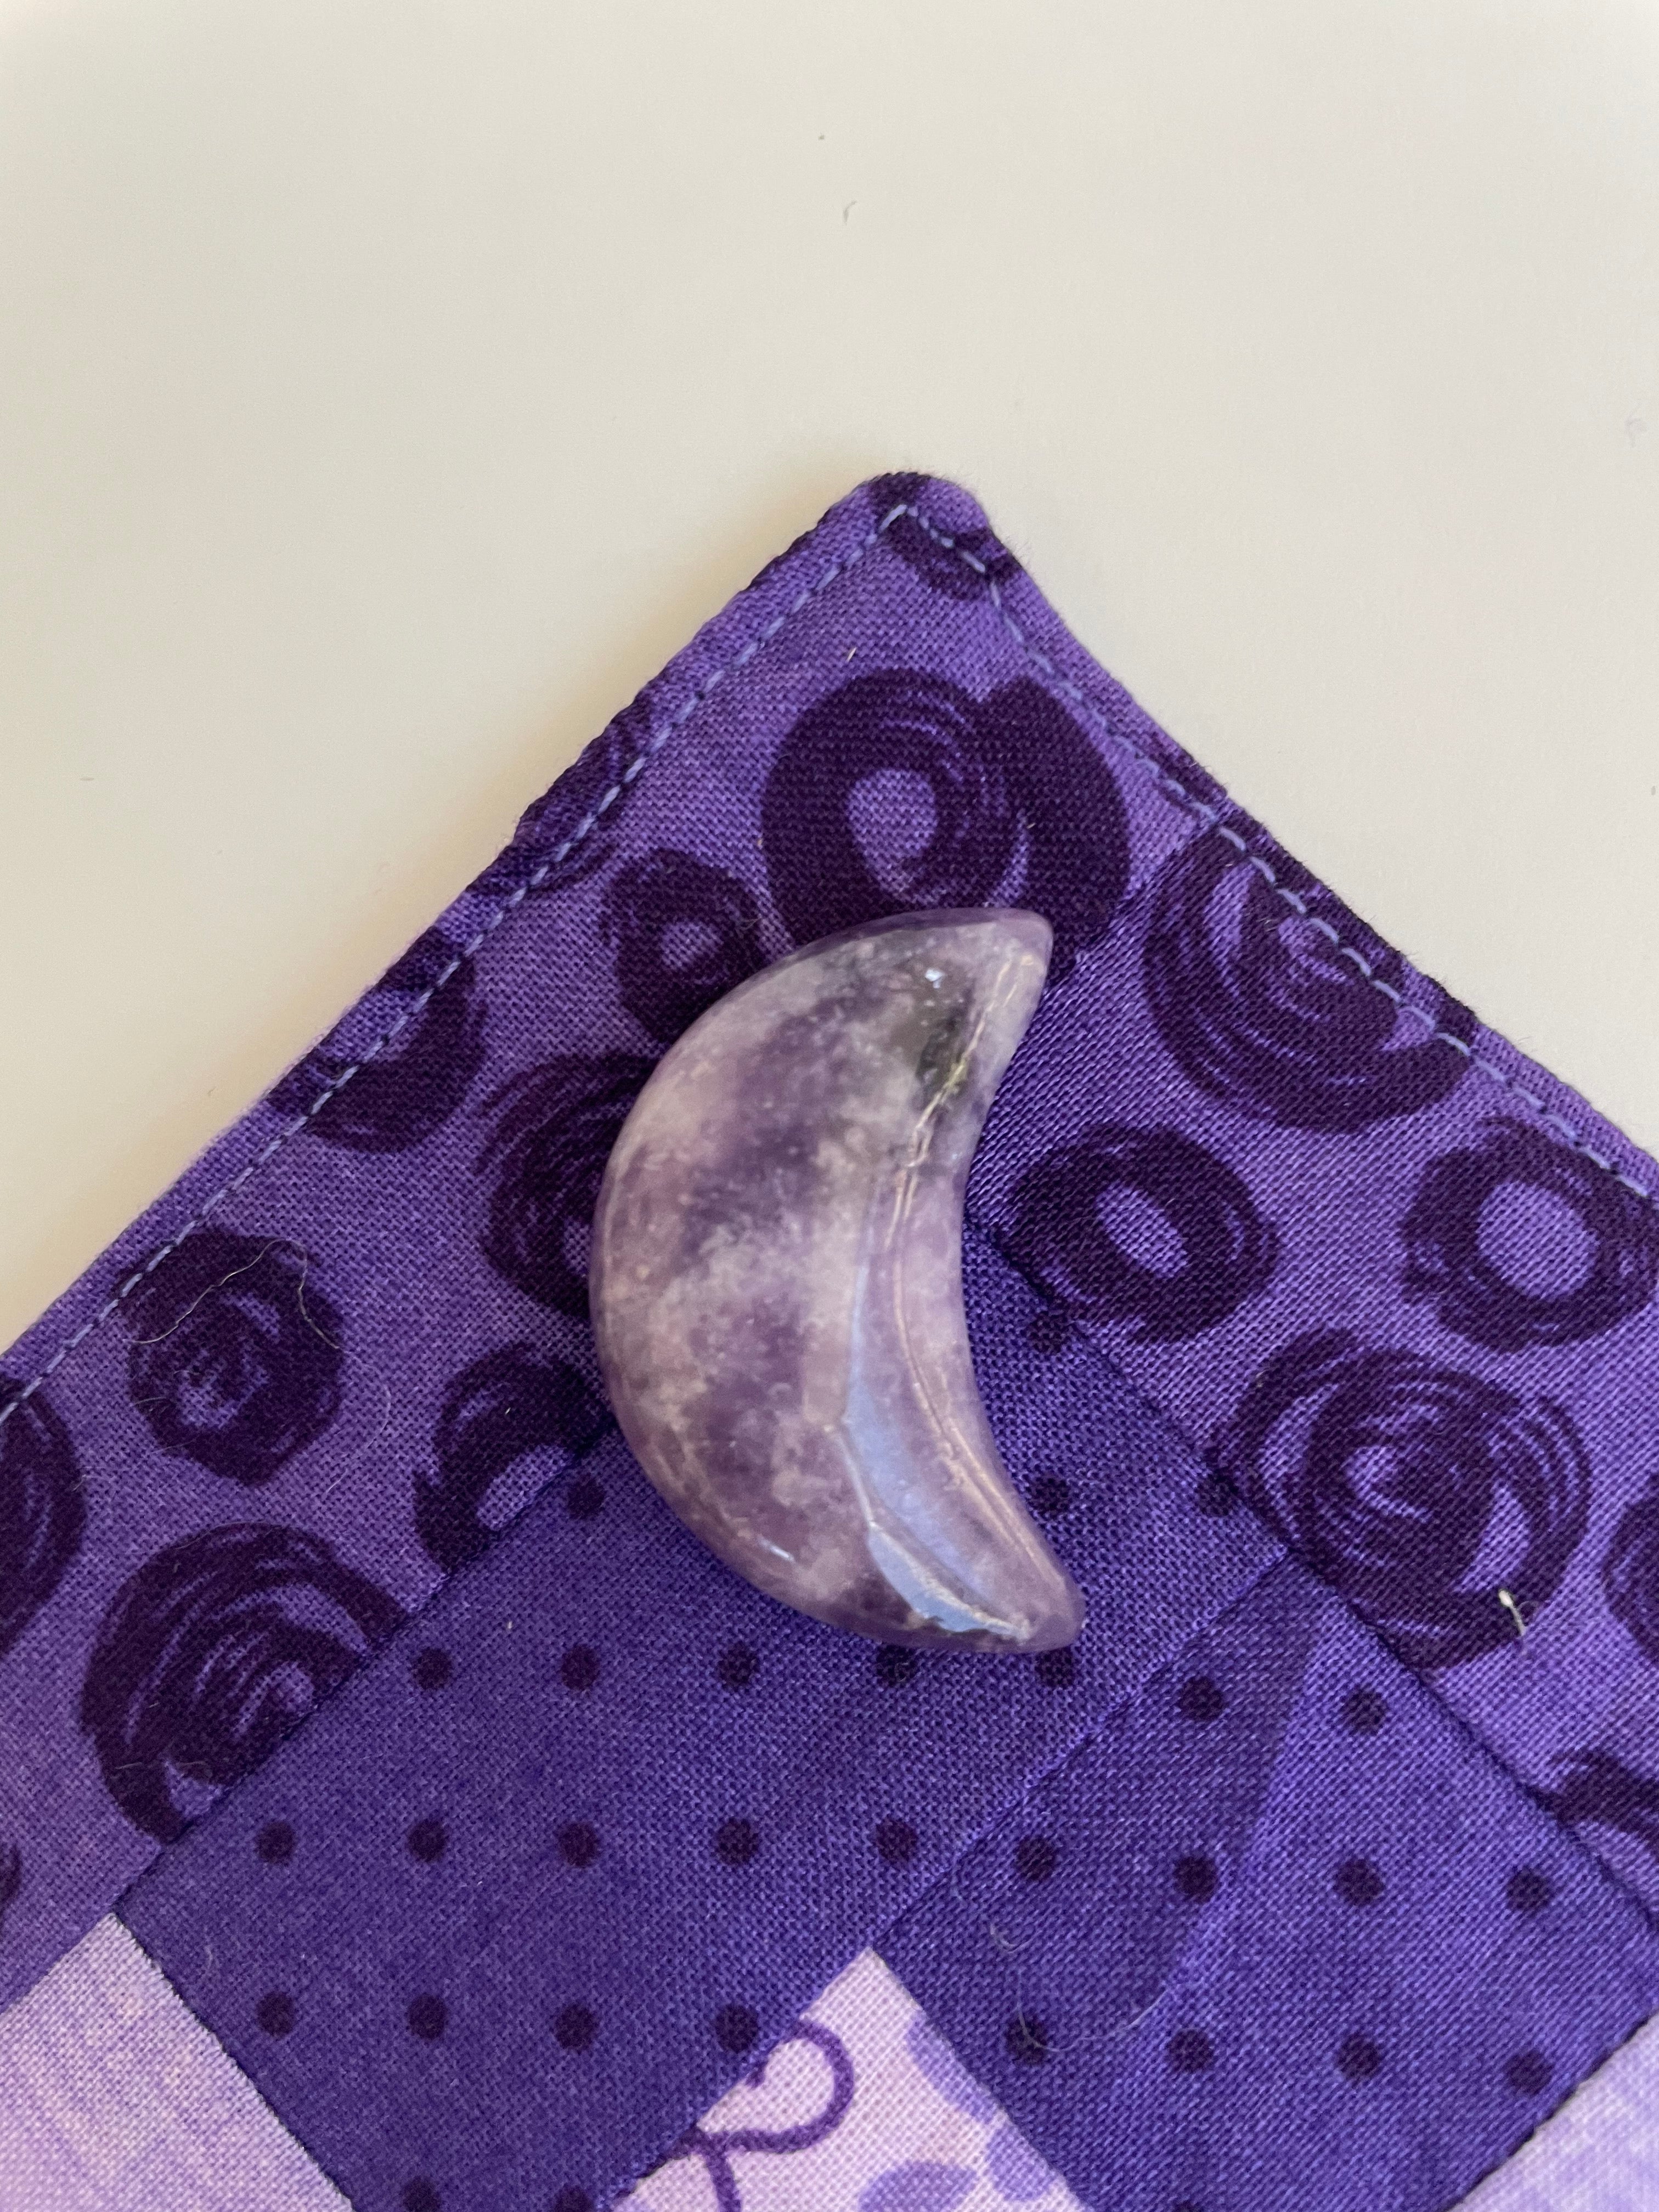 ﻿This sparkly little lavender-colored lepidolite crescent moon can be used for meditation, healing, for your altar, on/near your computer or as décor for any room in your home or office. Easy to slip right into your pocket so you can take the energy of lepidolite everywhere you go. Approx. 1¼". Cost is $6. 